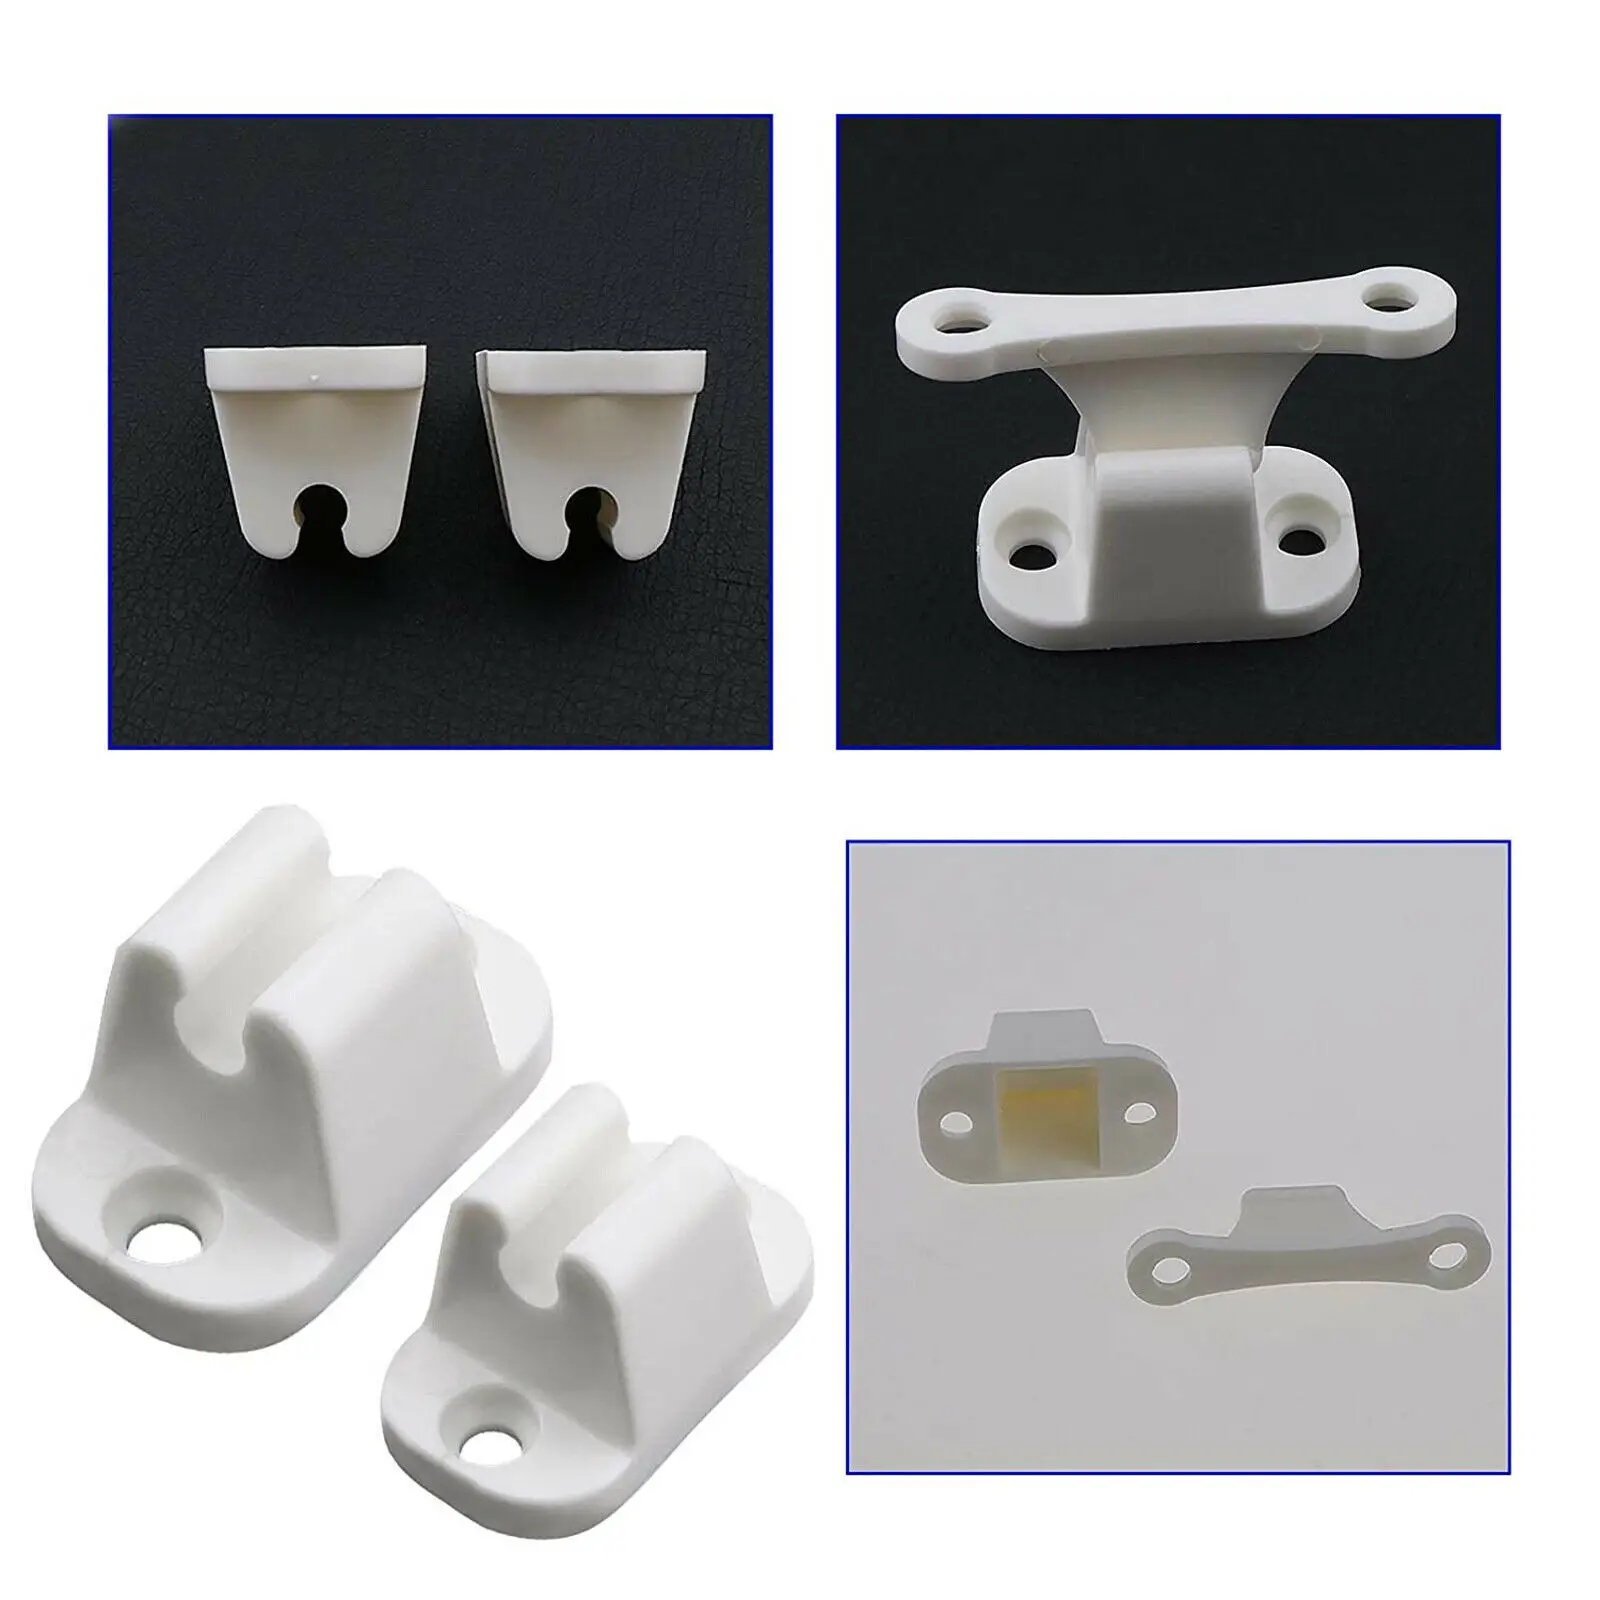 

Brand New Door Retainer Catch Door Catch Female Section Nylon Plastic Shocks And Noise Strong - Absorbs White Color 2pcs Elddis